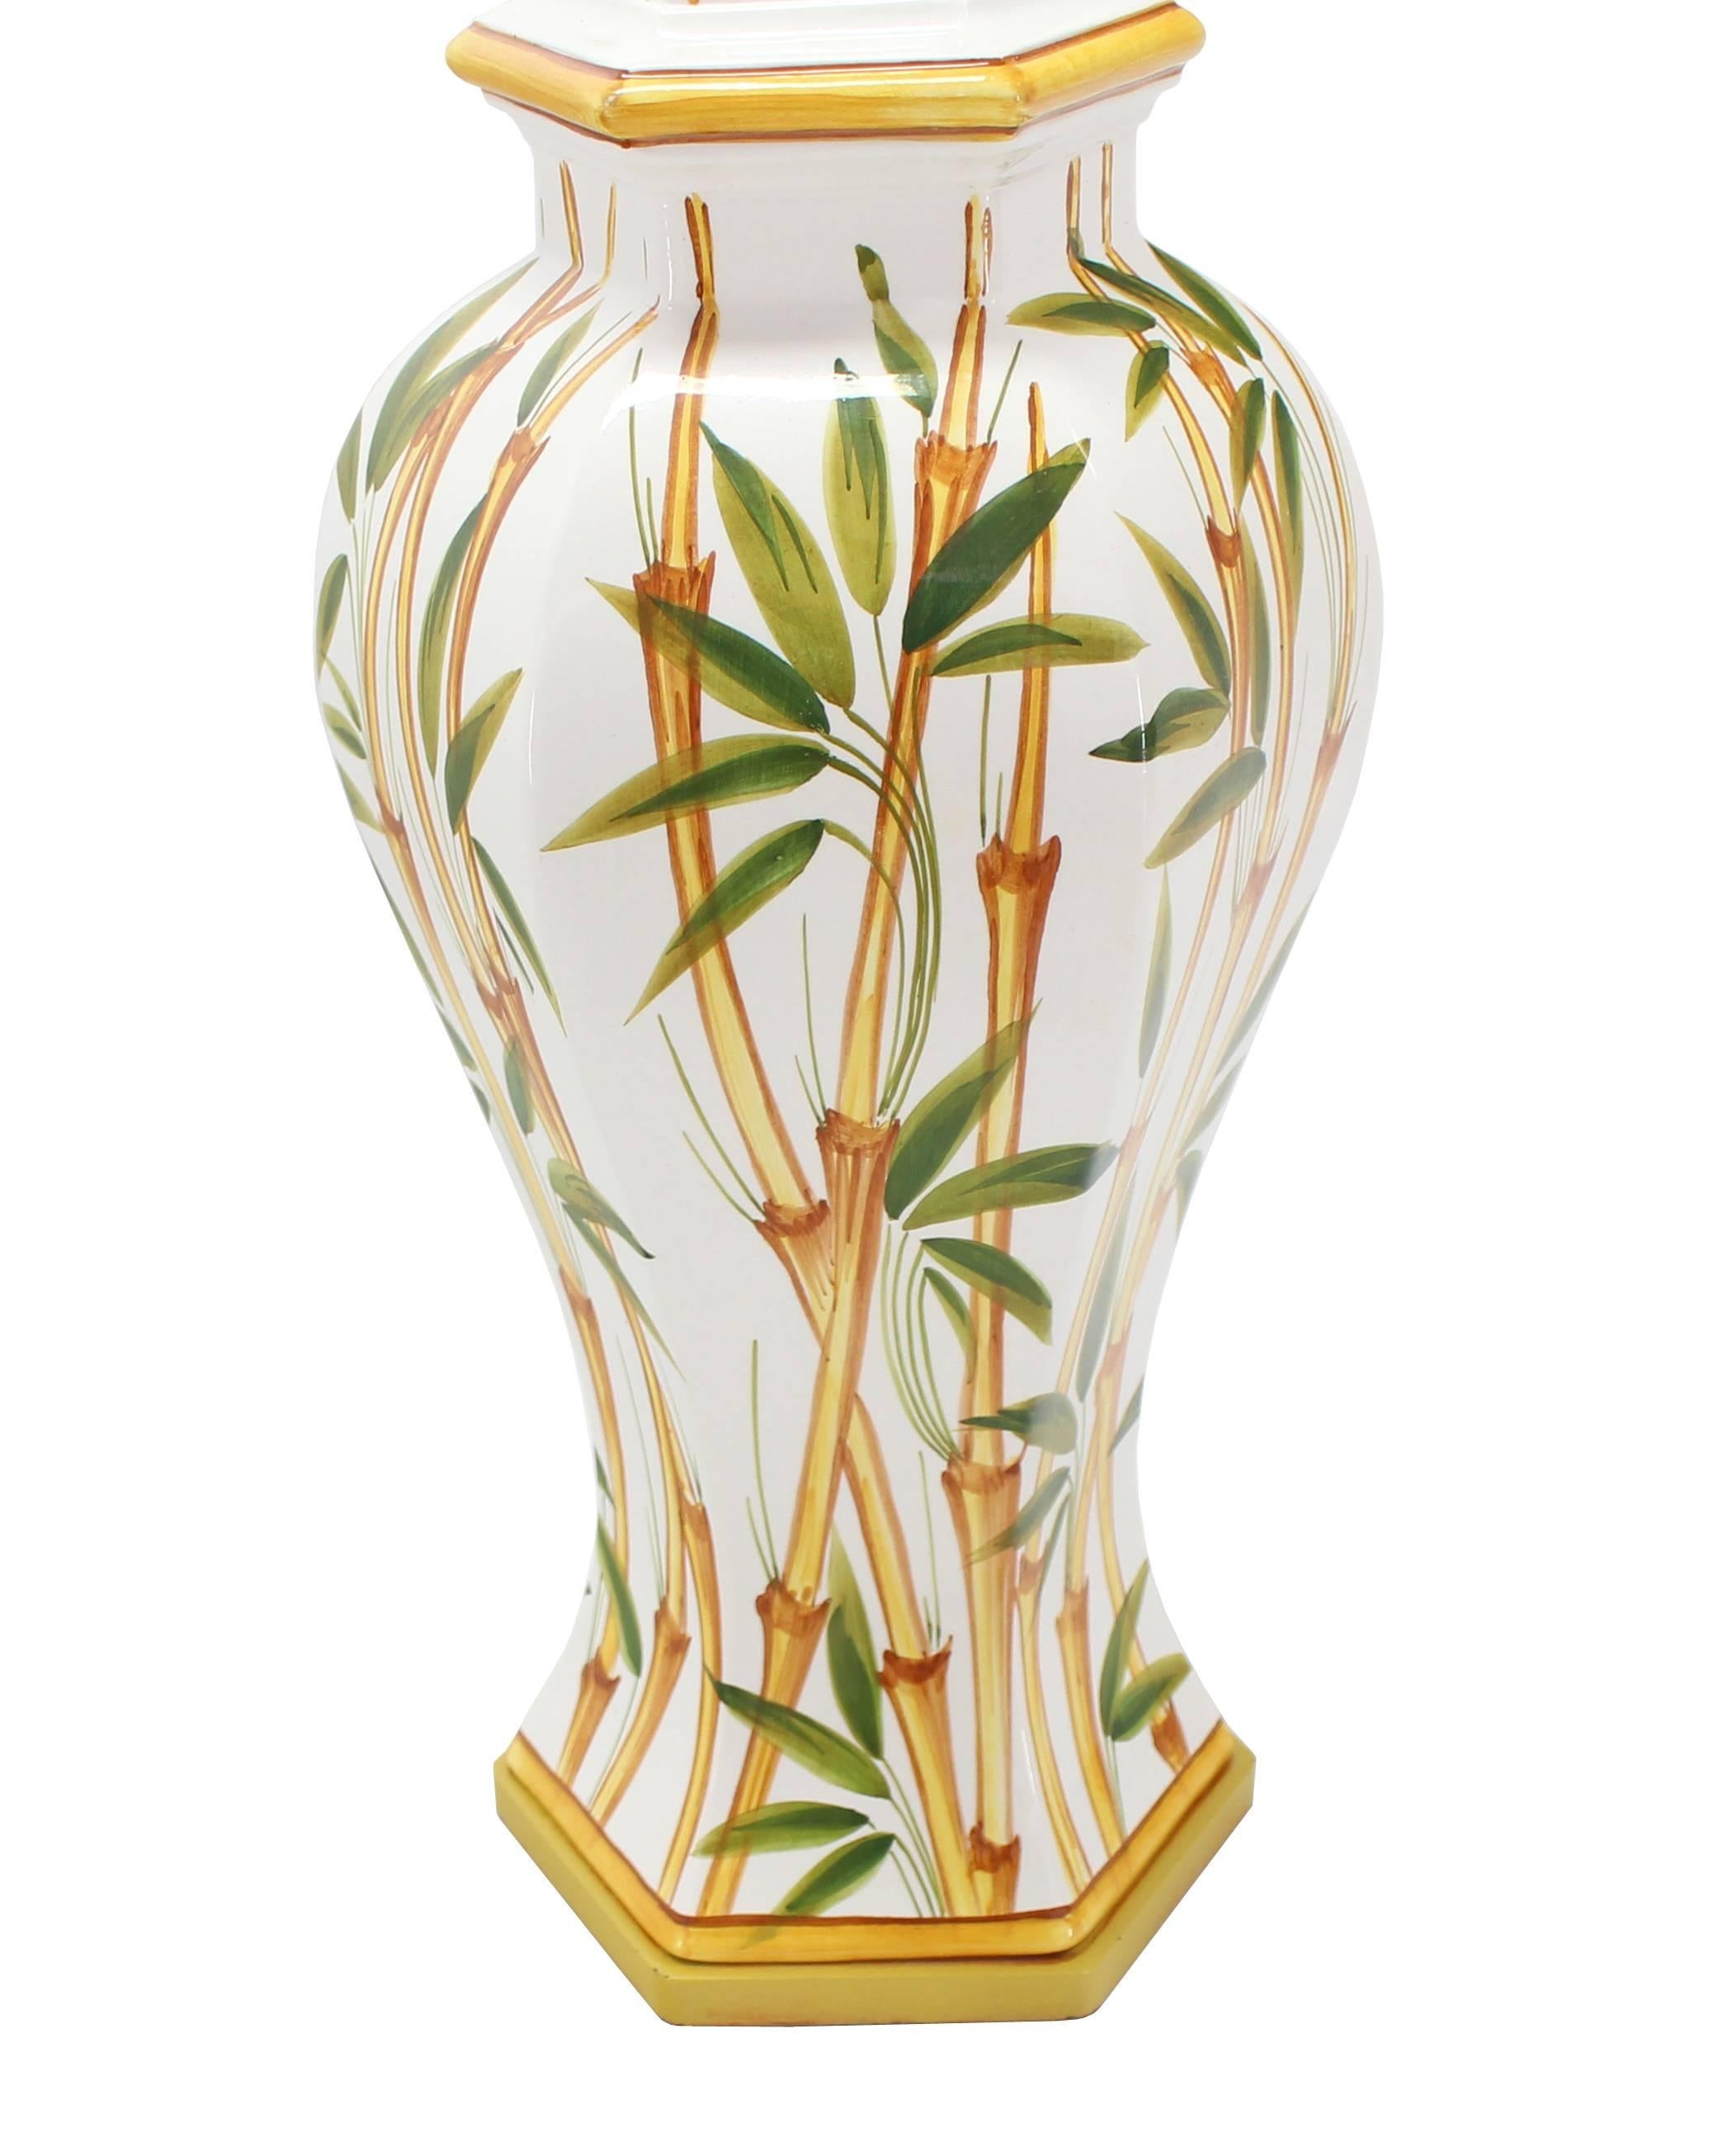 Pair of Bamboo Hand Decorated Table Lamps In Excellent Condition For Sale In Rockaway, NJ